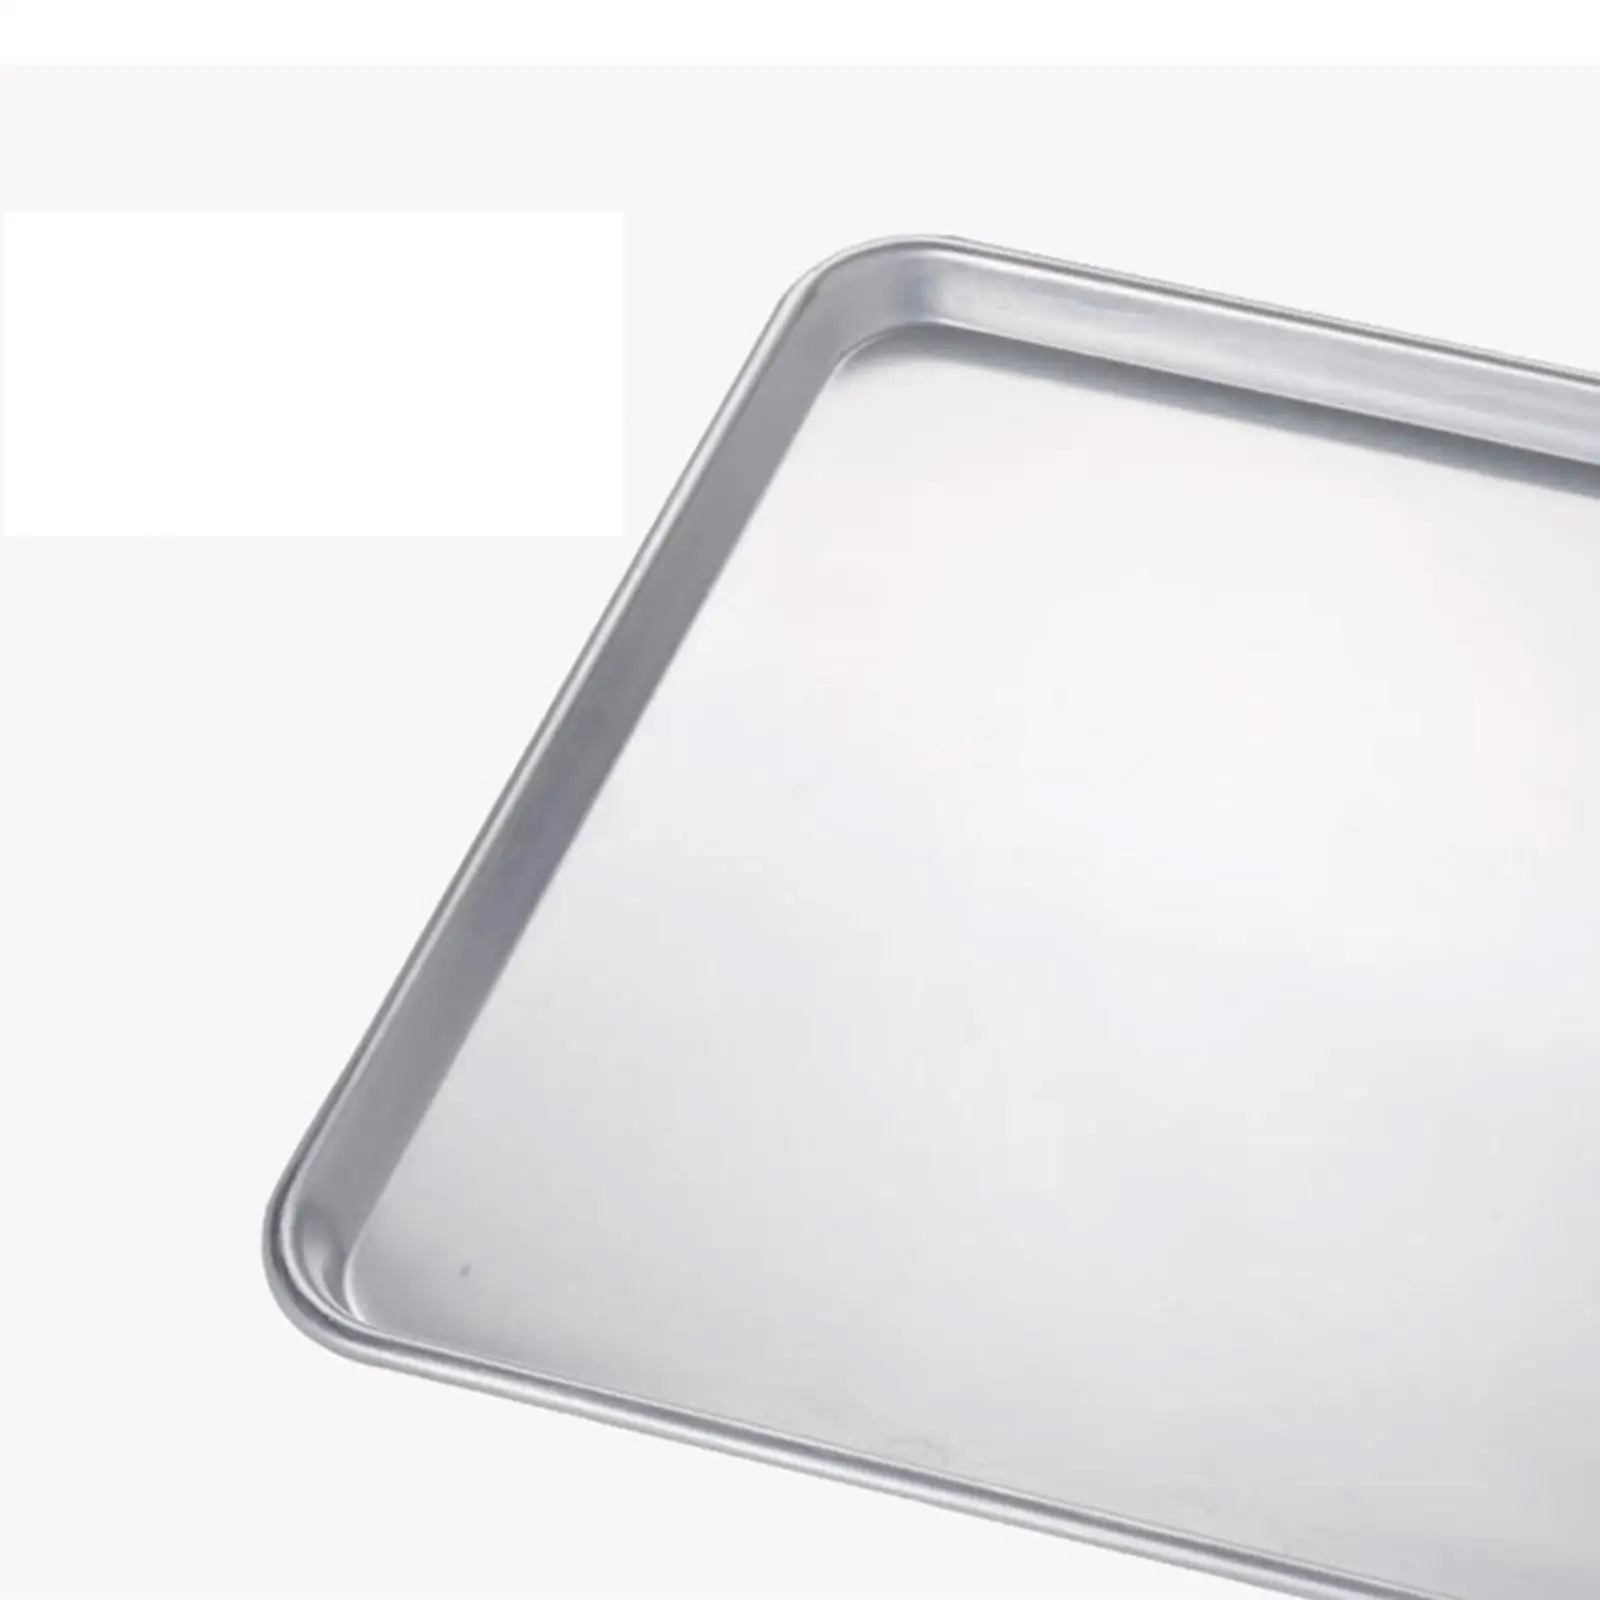 Baking Sheet Tray Aluminum Alloy Metal Easy Clean Oven Baking Tray Cookie Sheet